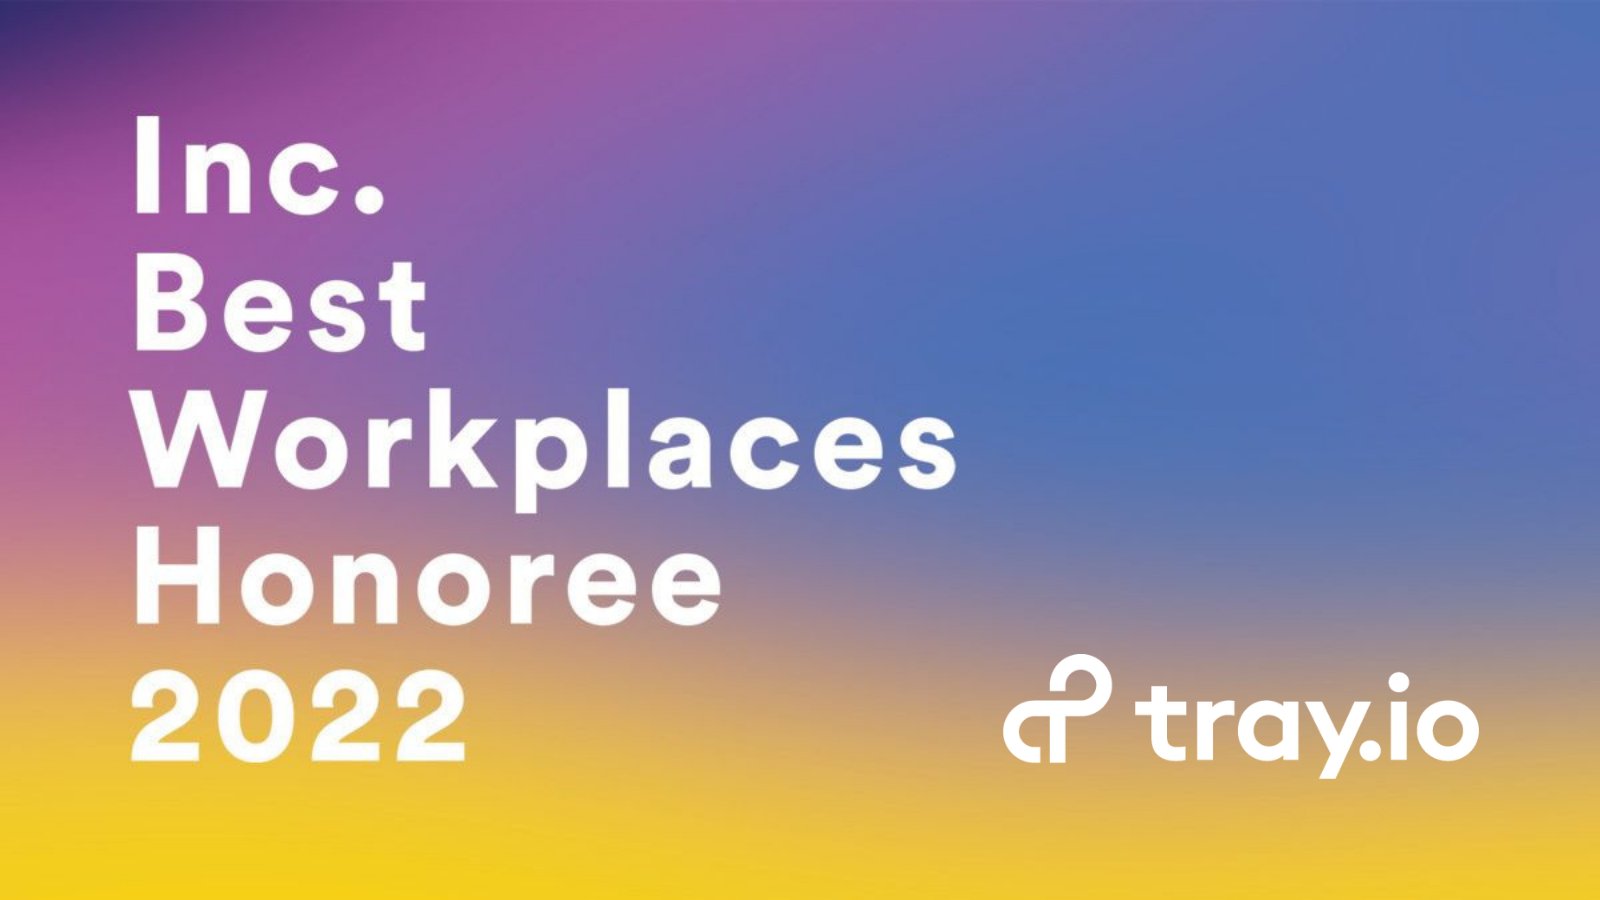 Tray.io makes Inc.com's list of best workplaces of 2022